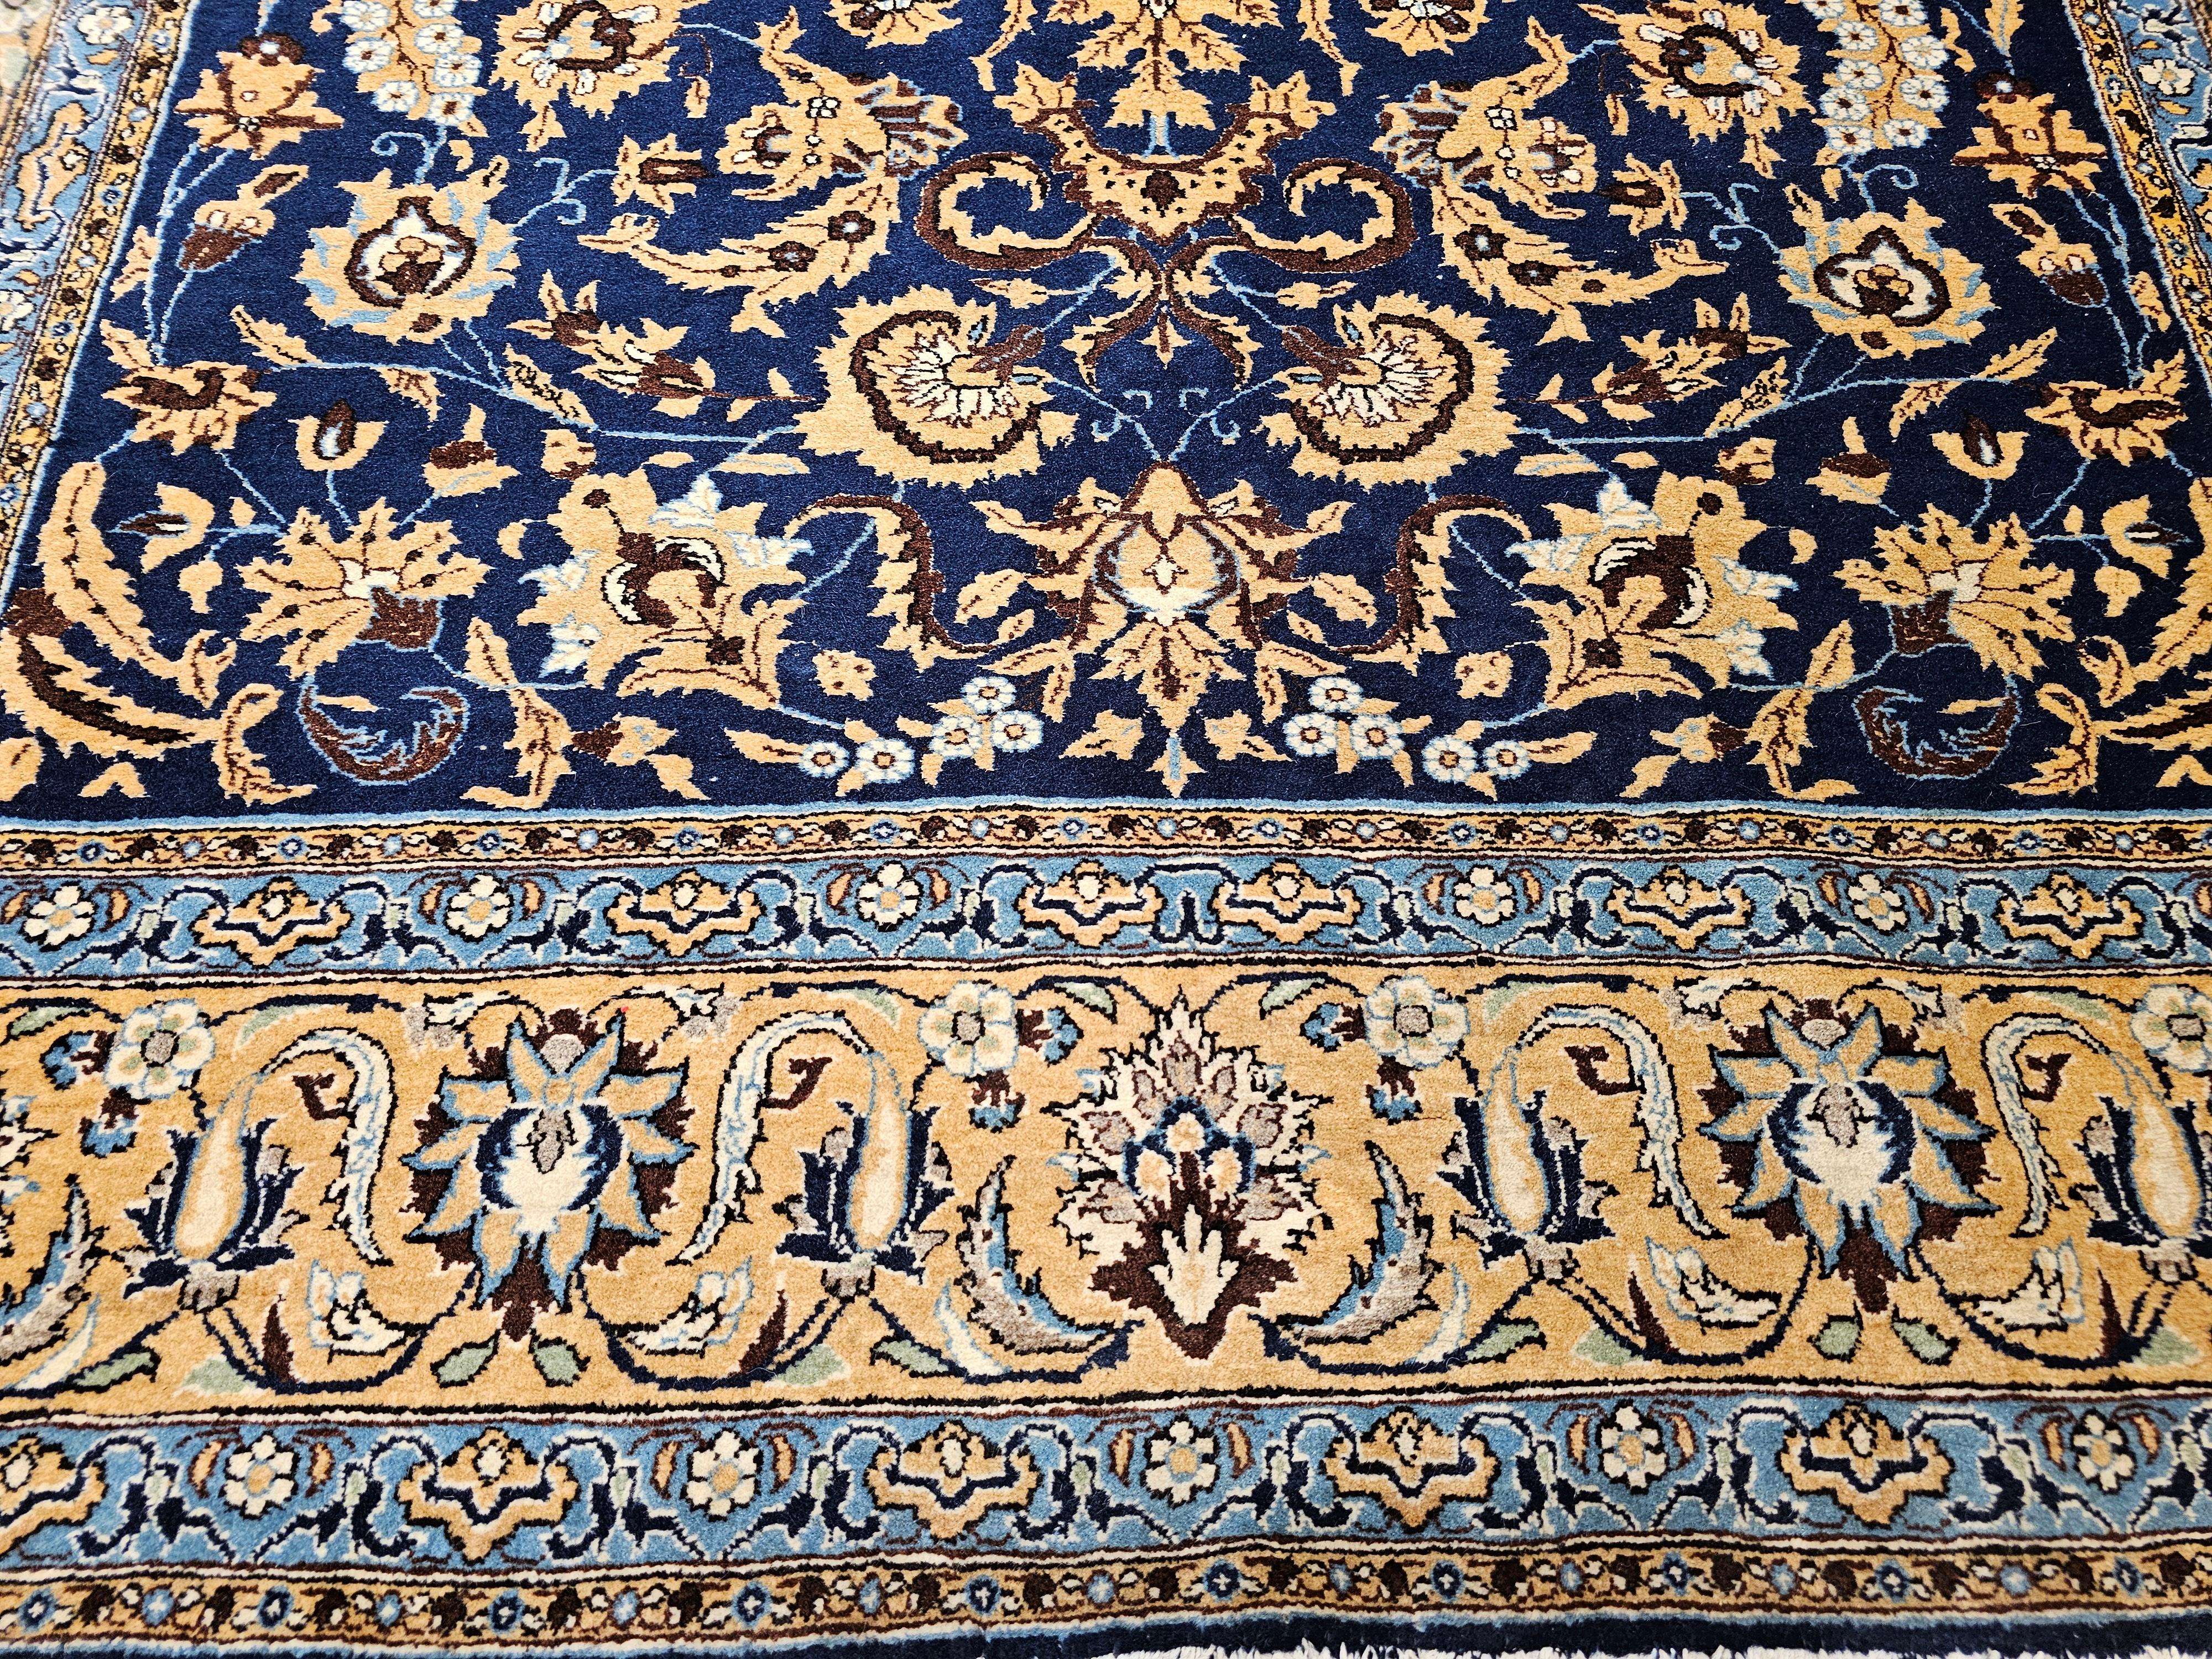 Wool Vintage Persian Tabriz in an Allover Pattern in Navy Blue, Tan, Brown, Baby Blue For Sale